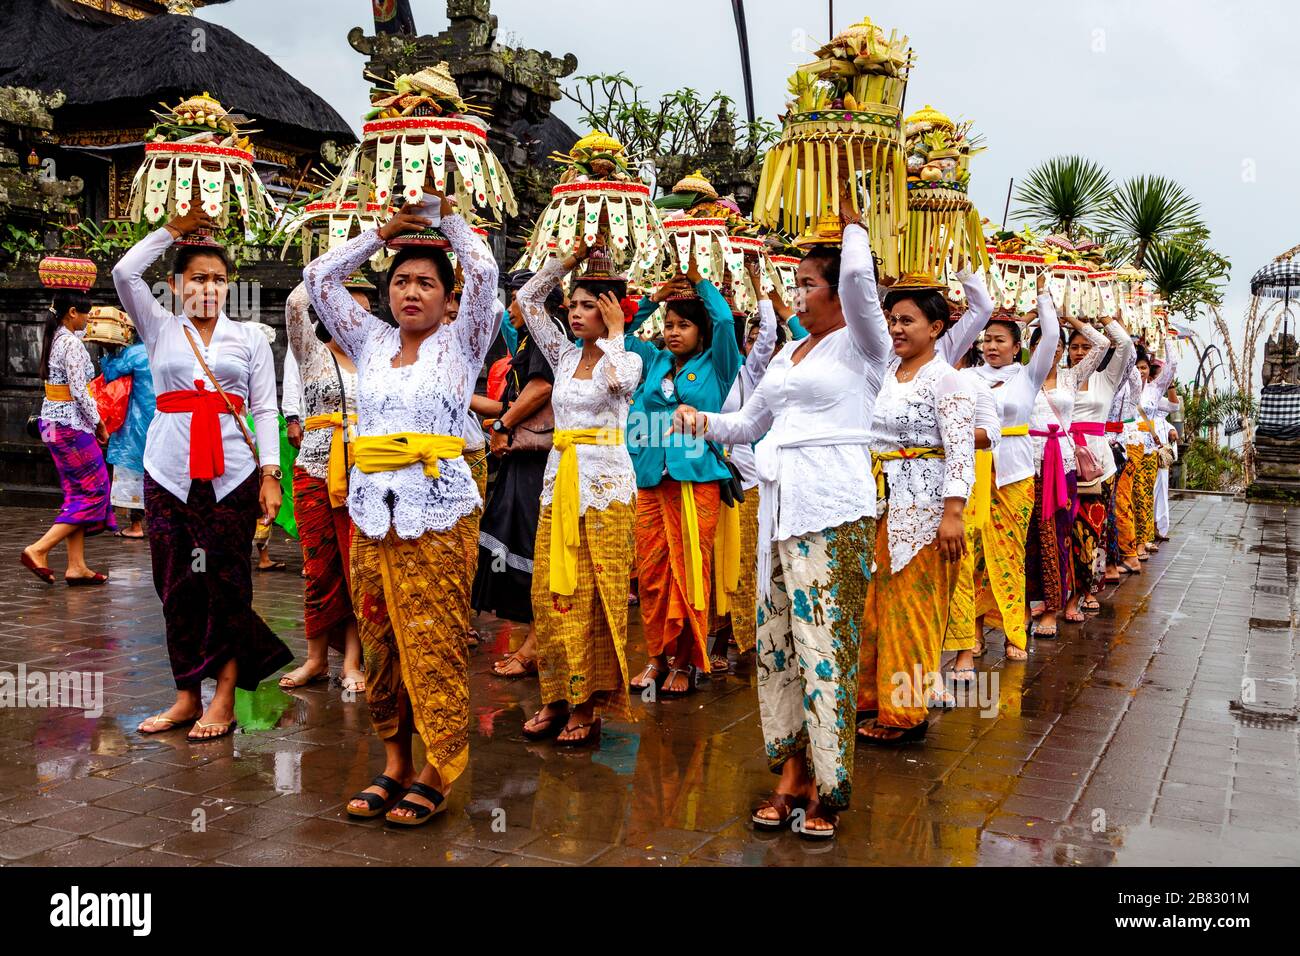 A Group Of Balinese Hindu Women Carrying Temple Offerings At The Batara Turun Kabeh Ceremony, Besakih Temple, Bali, Indonesia. Stock Photo